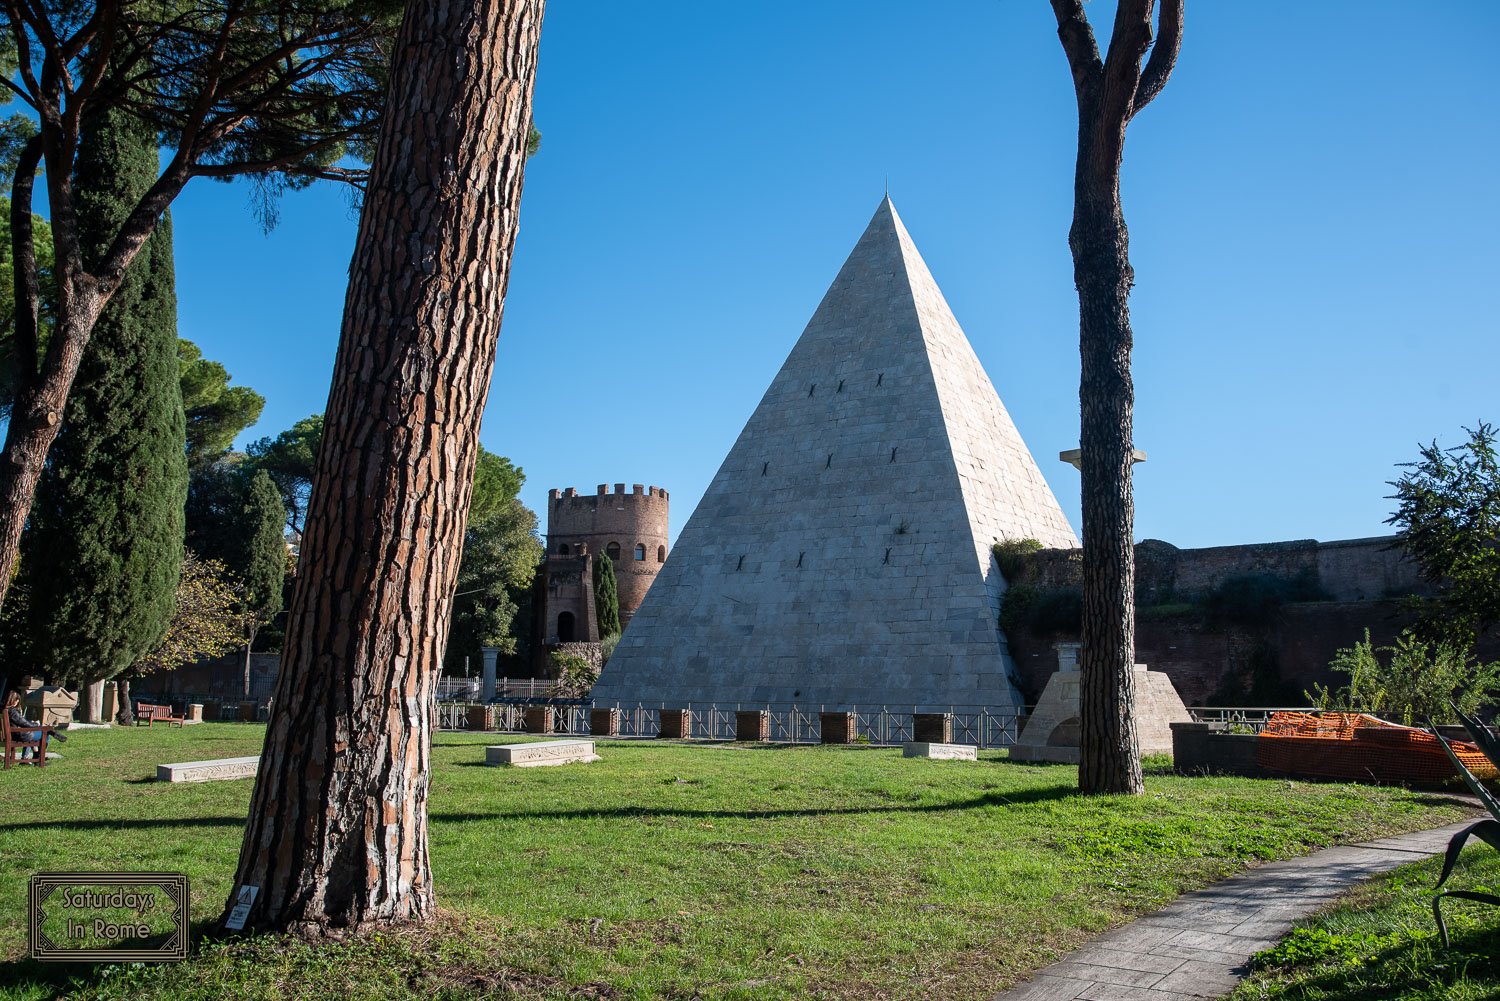 districts in rome italy - the pyramid